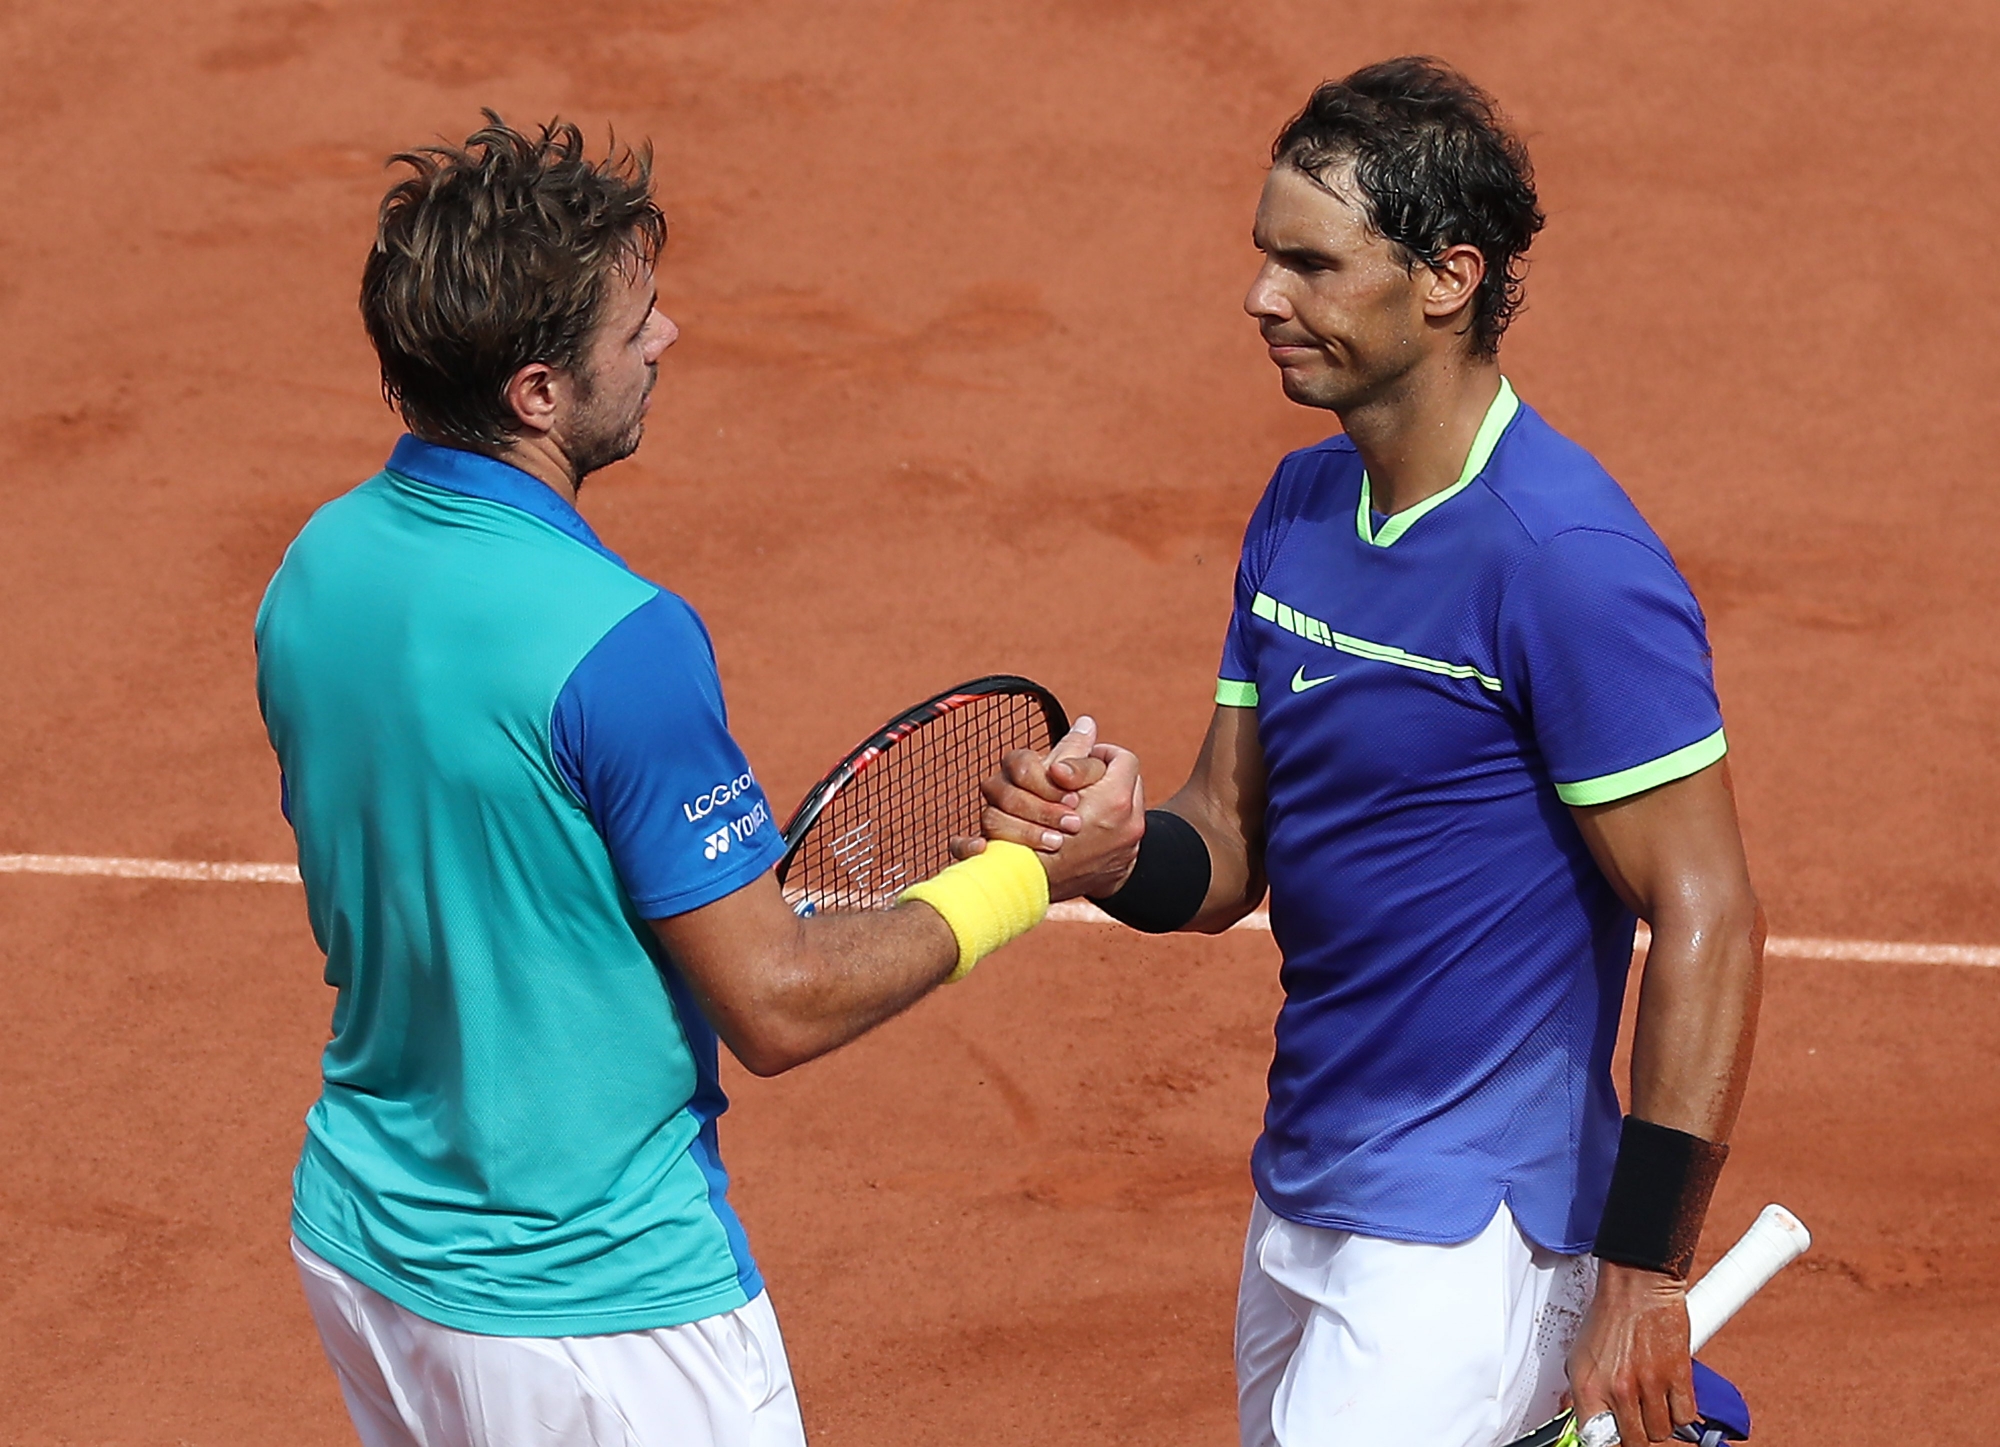 epa06022811 Rafael Nadal of Spain (R) shakes hands  after winning the menís singles final match against Stanislas Wawrinka of Switzerland during the French Open tennis tournament at Roland Garros in Paris, France, 11June 2017.  EPA/STEPHAN MUELLER